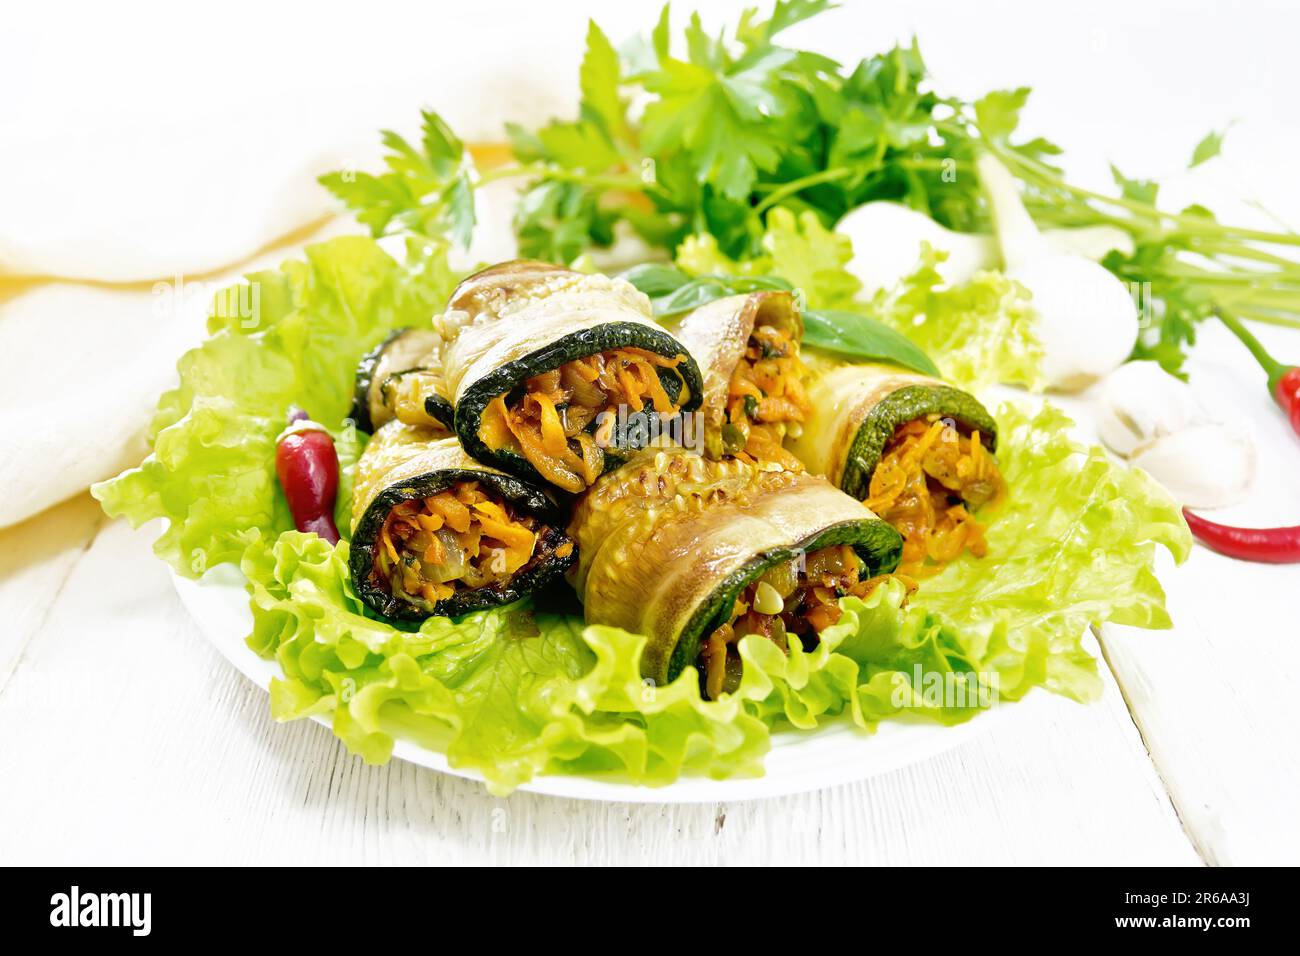 Spicy appetizer of zucchini with carrots, onions and garlic on lettuce leaves in a plate, napkin, hot peppers on white wooden board background Stock Photo